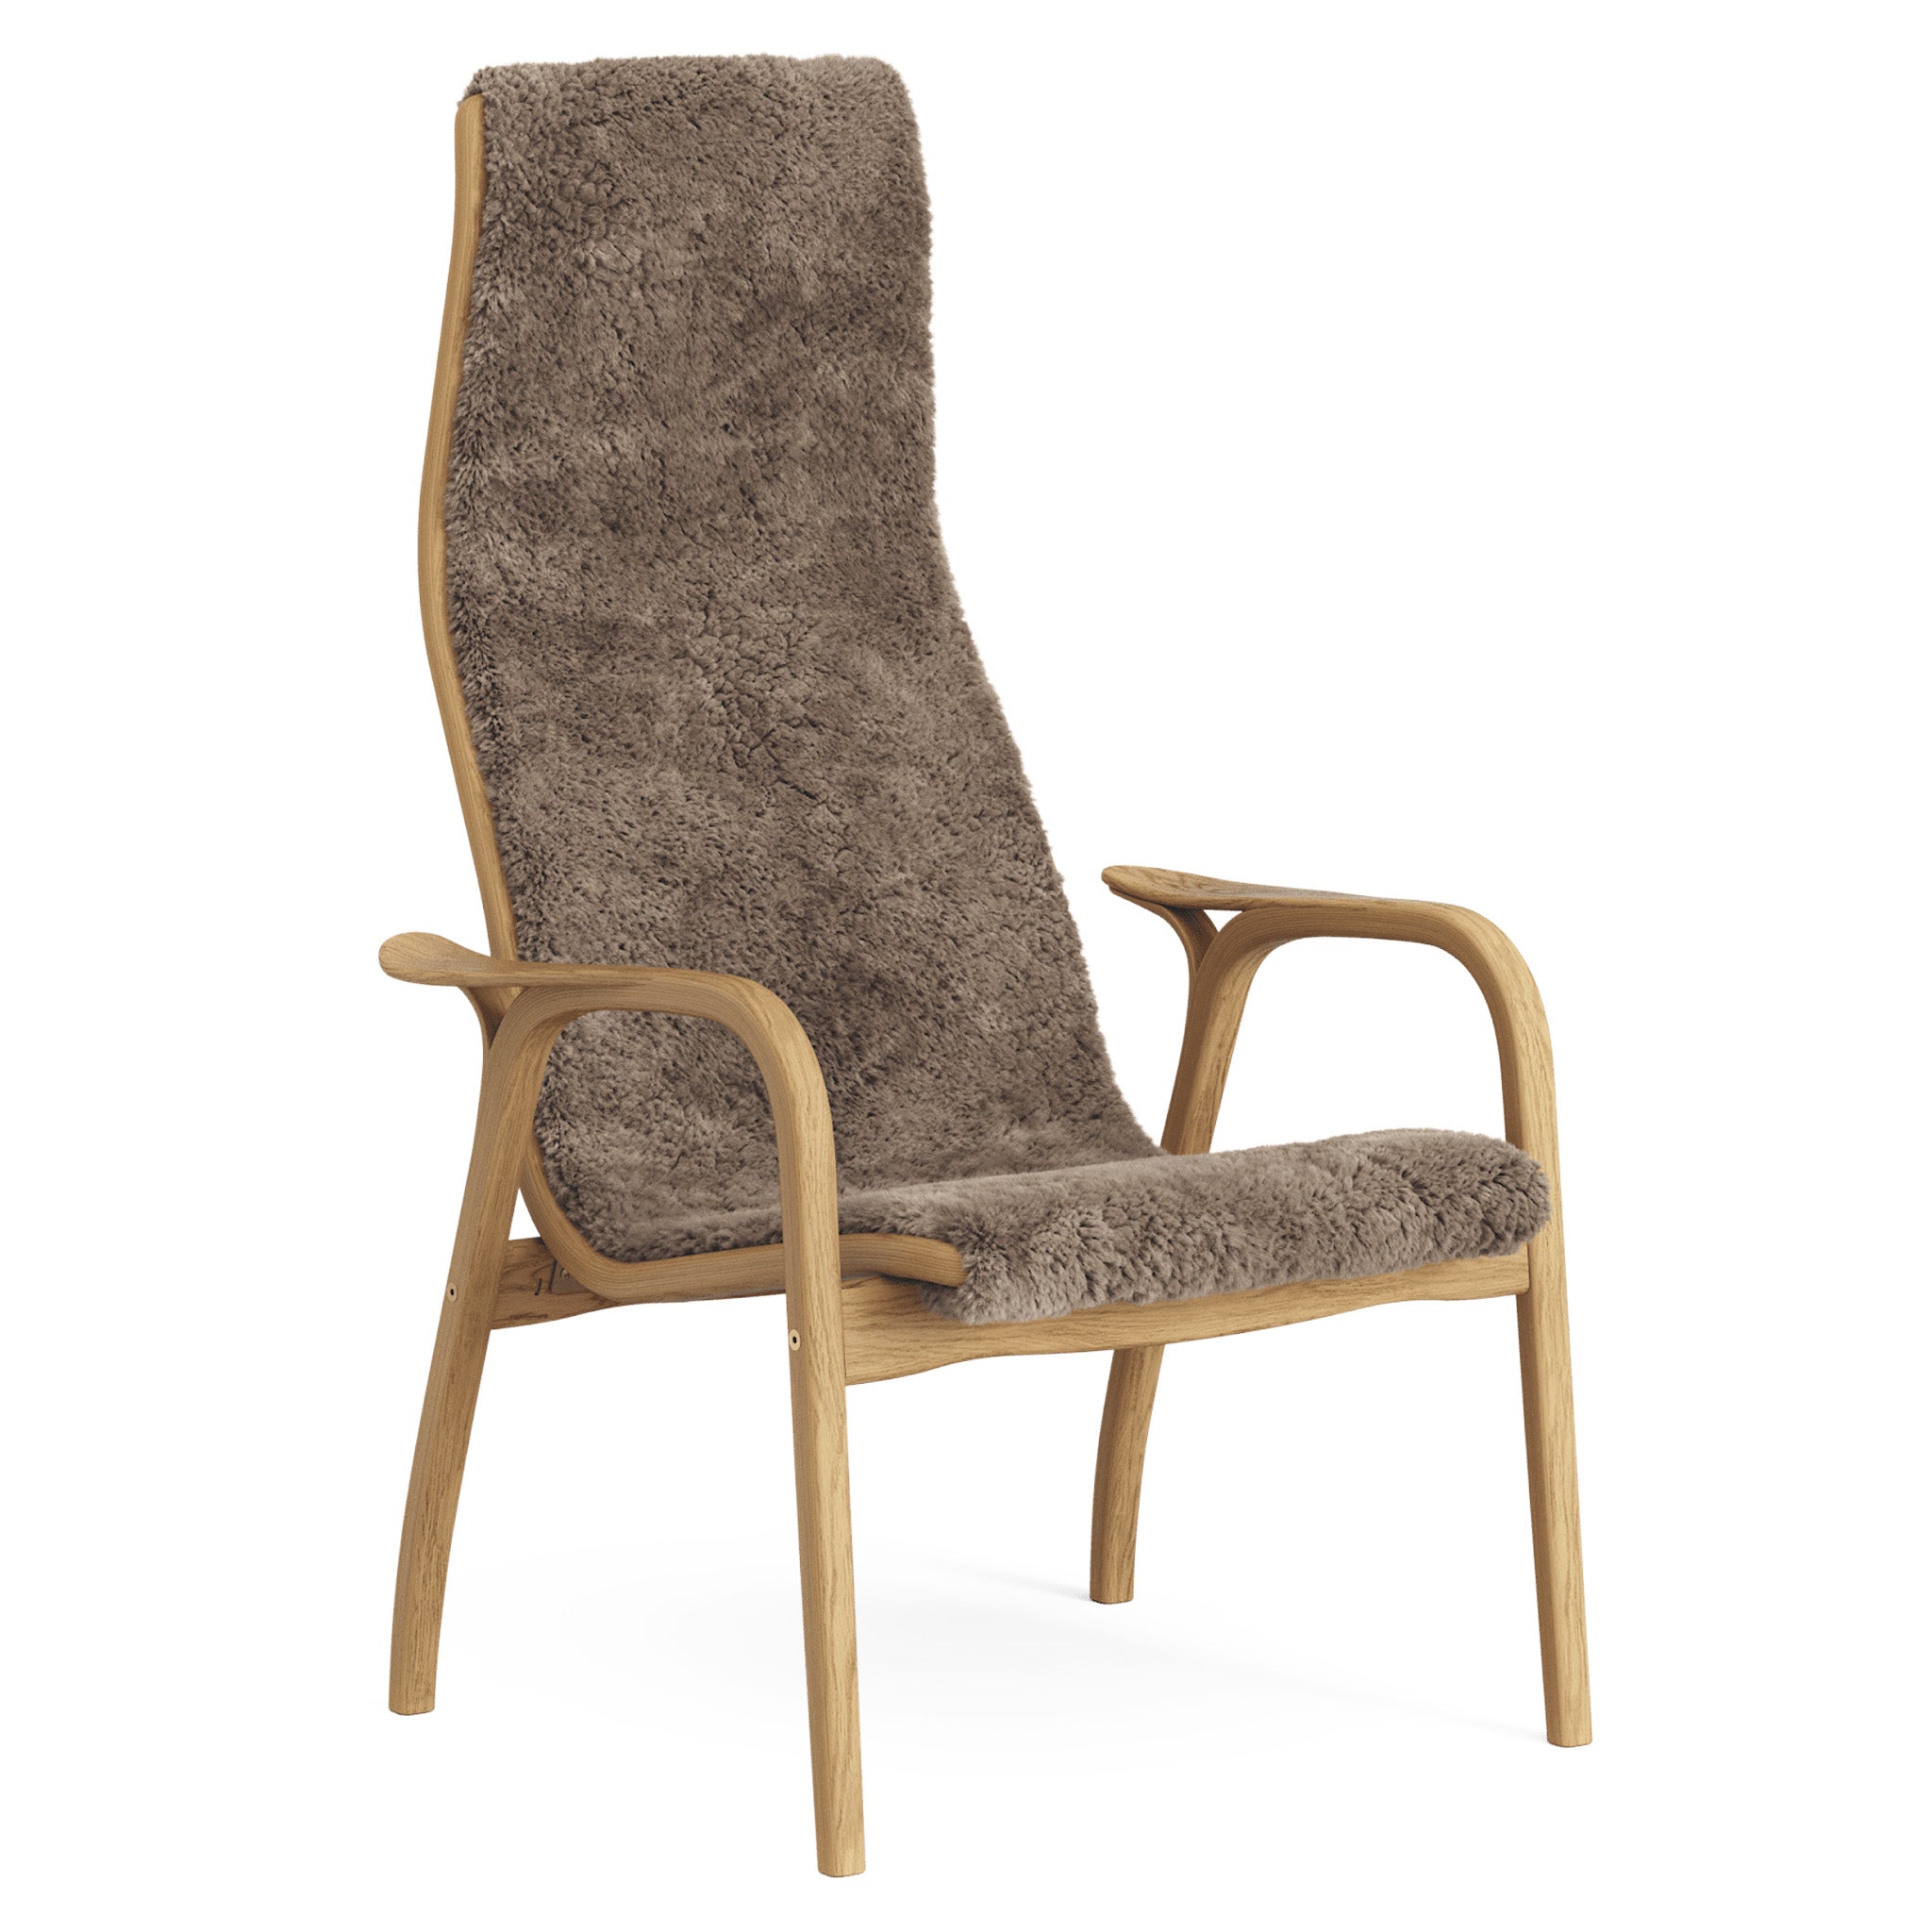 Lamino Lounger by Swedese